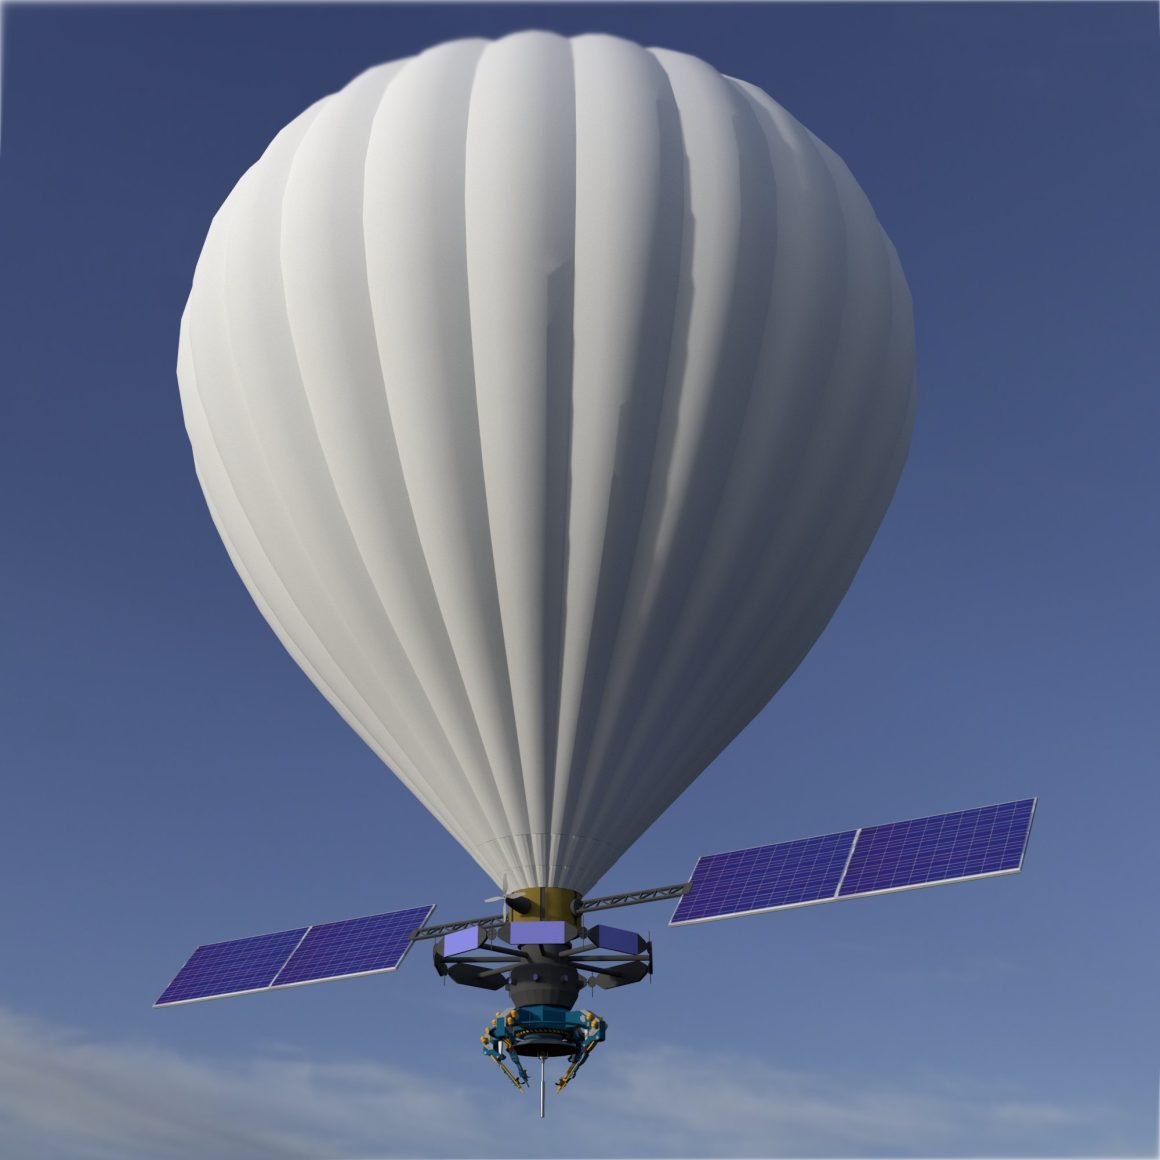 The Geostationary Balloon Satellite floats at about 65,000 feet and receives data from a parabolic antenna base station. It rains down cellular data and can capture aerial video and imagery.